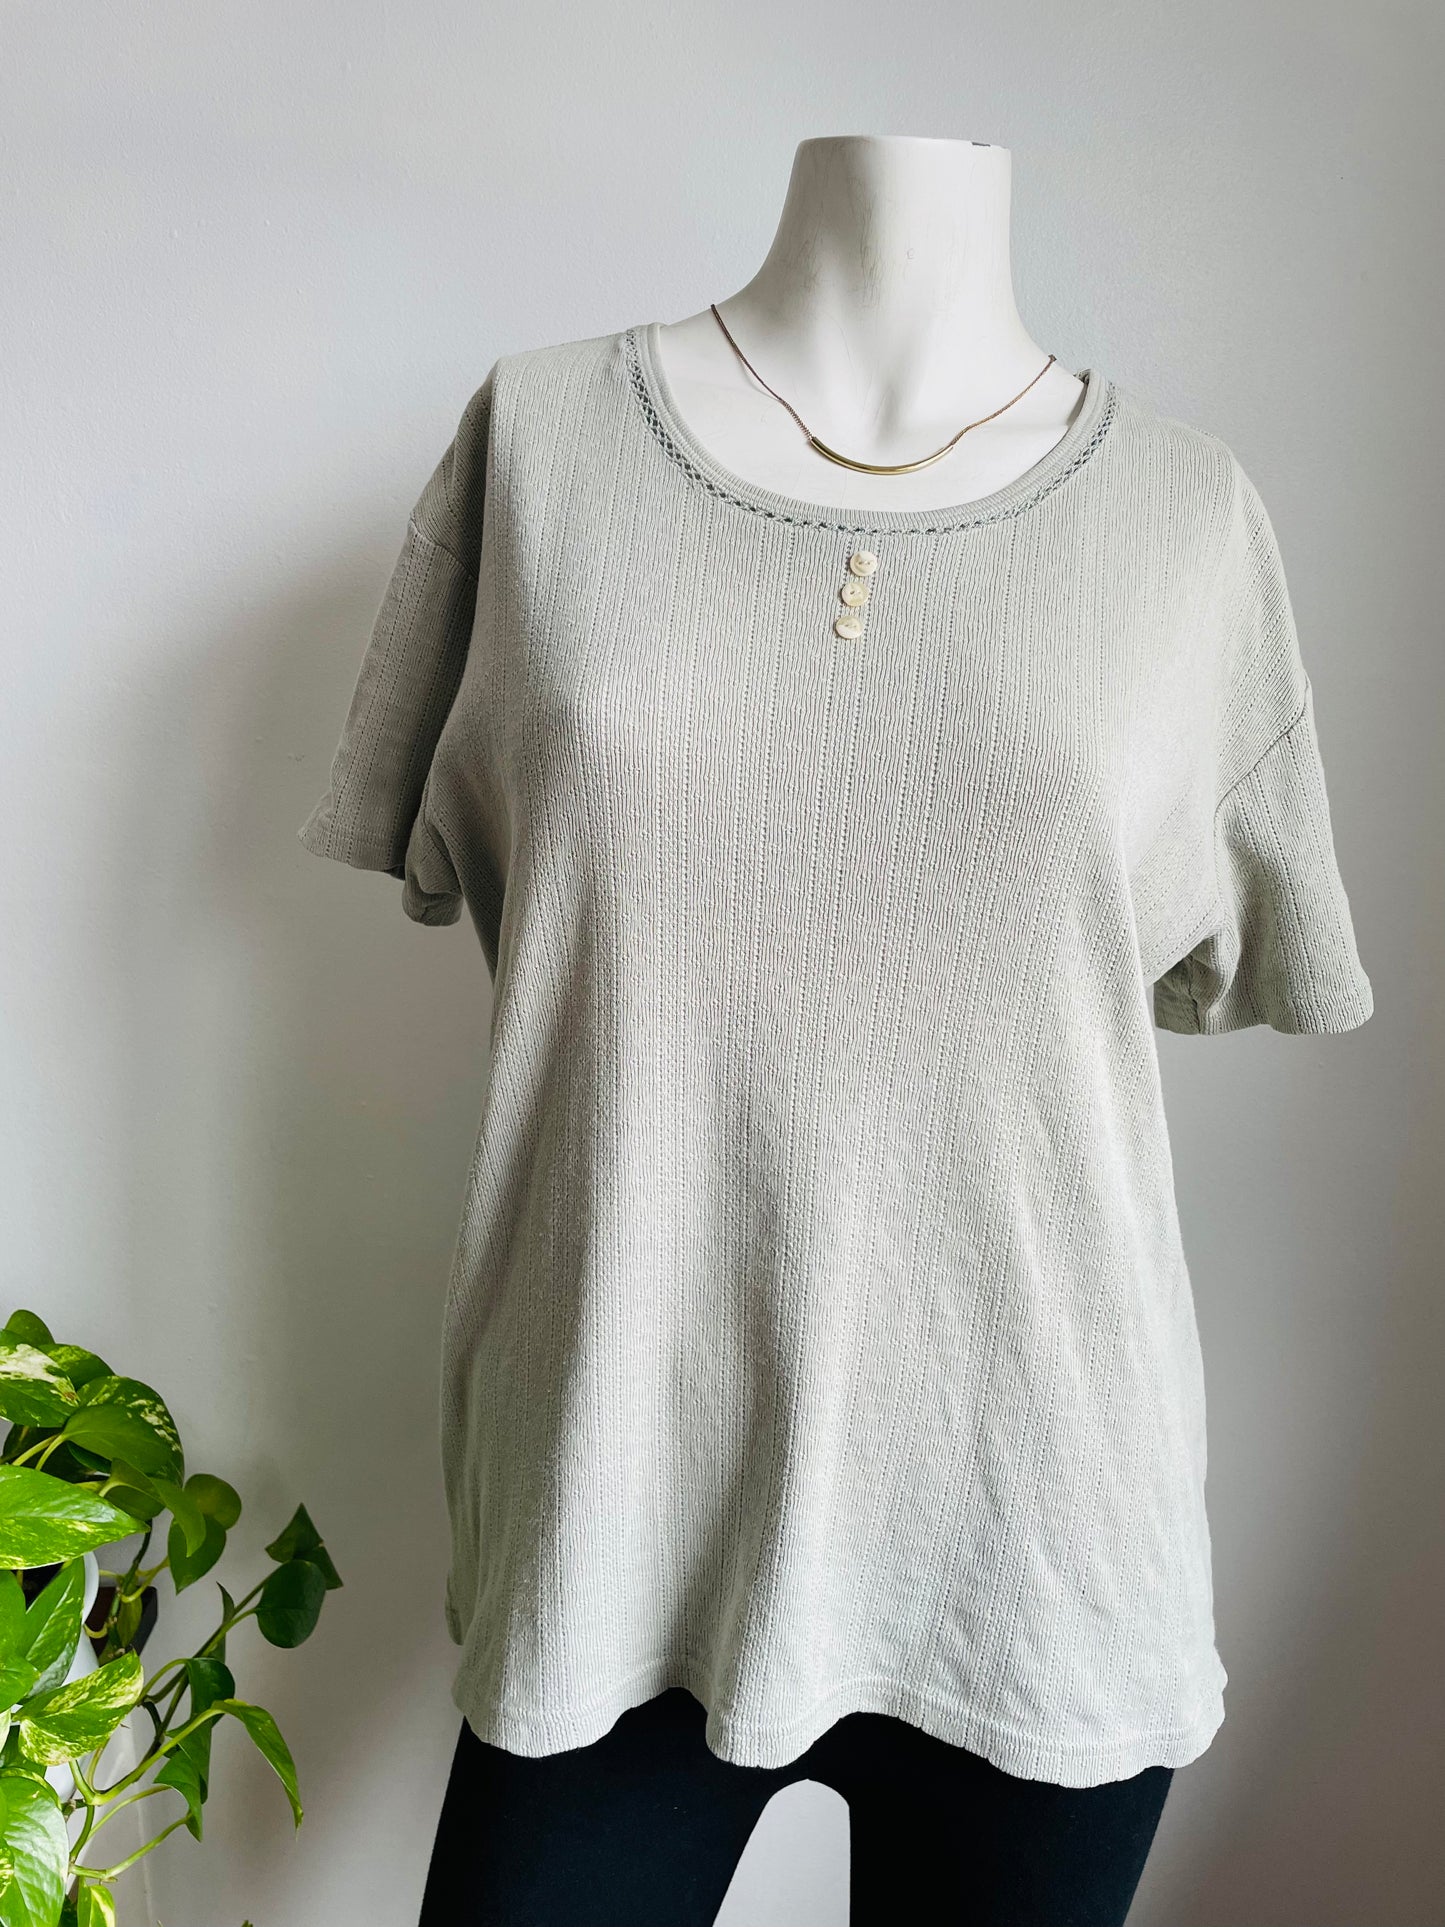 Oblige 100% Cotton Sage Green Cottagecore T-Shirt - Made in Hong Kong - Size Small